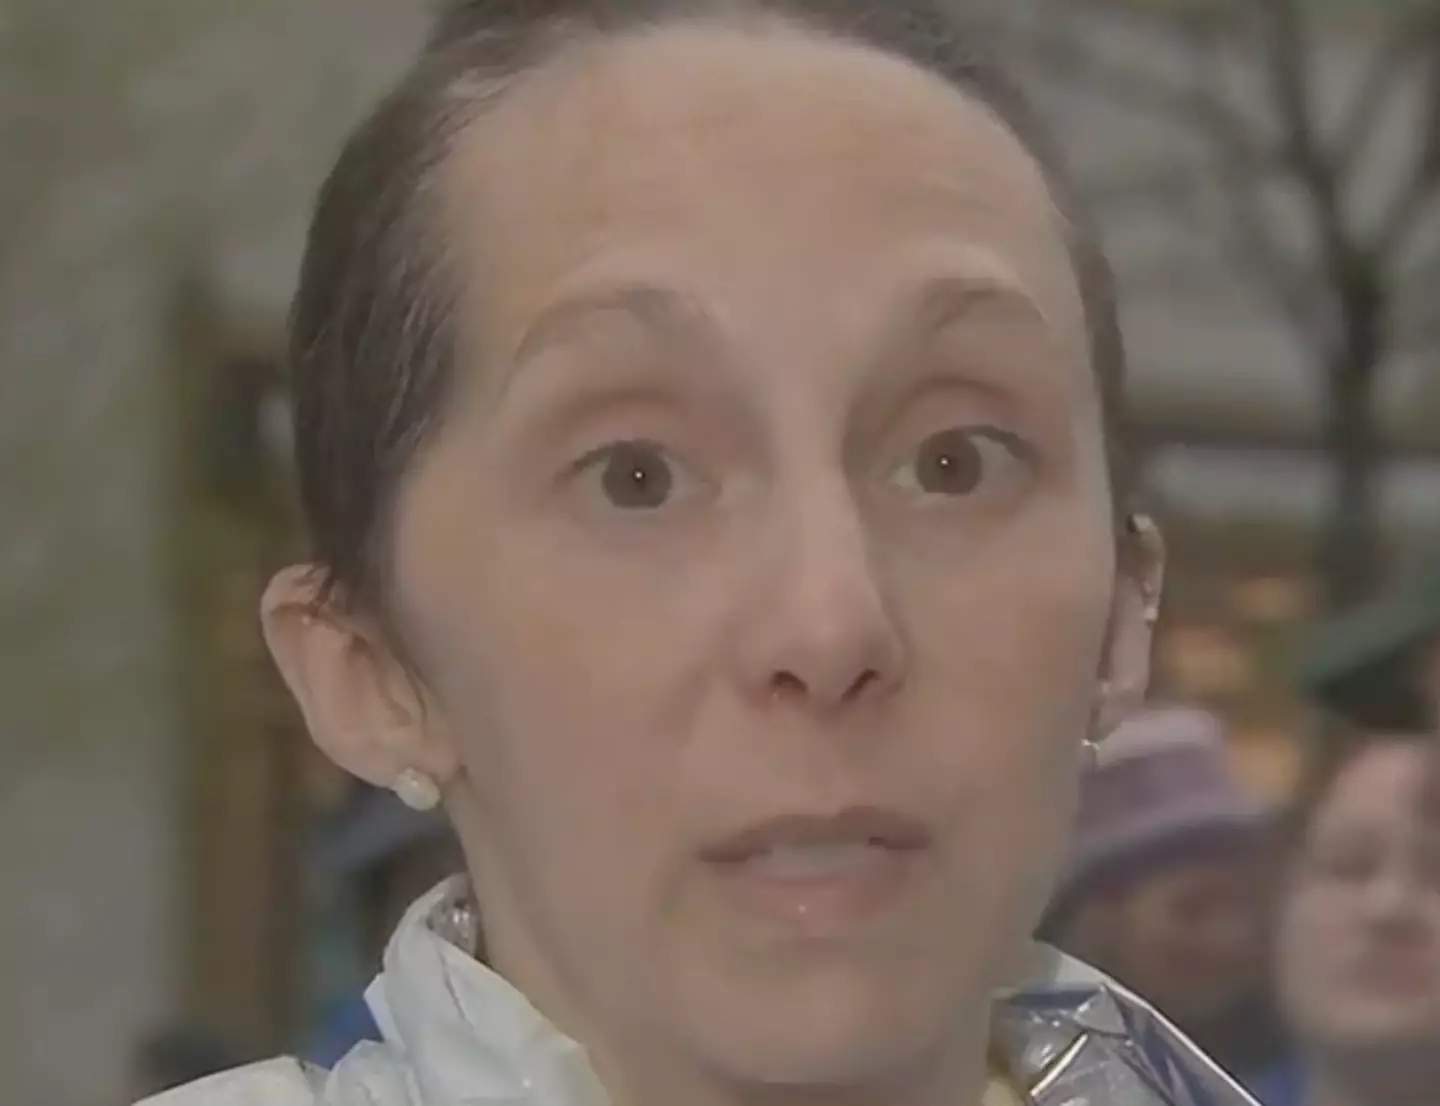 Rachel was determined to run the marathon after waking up from her coma.